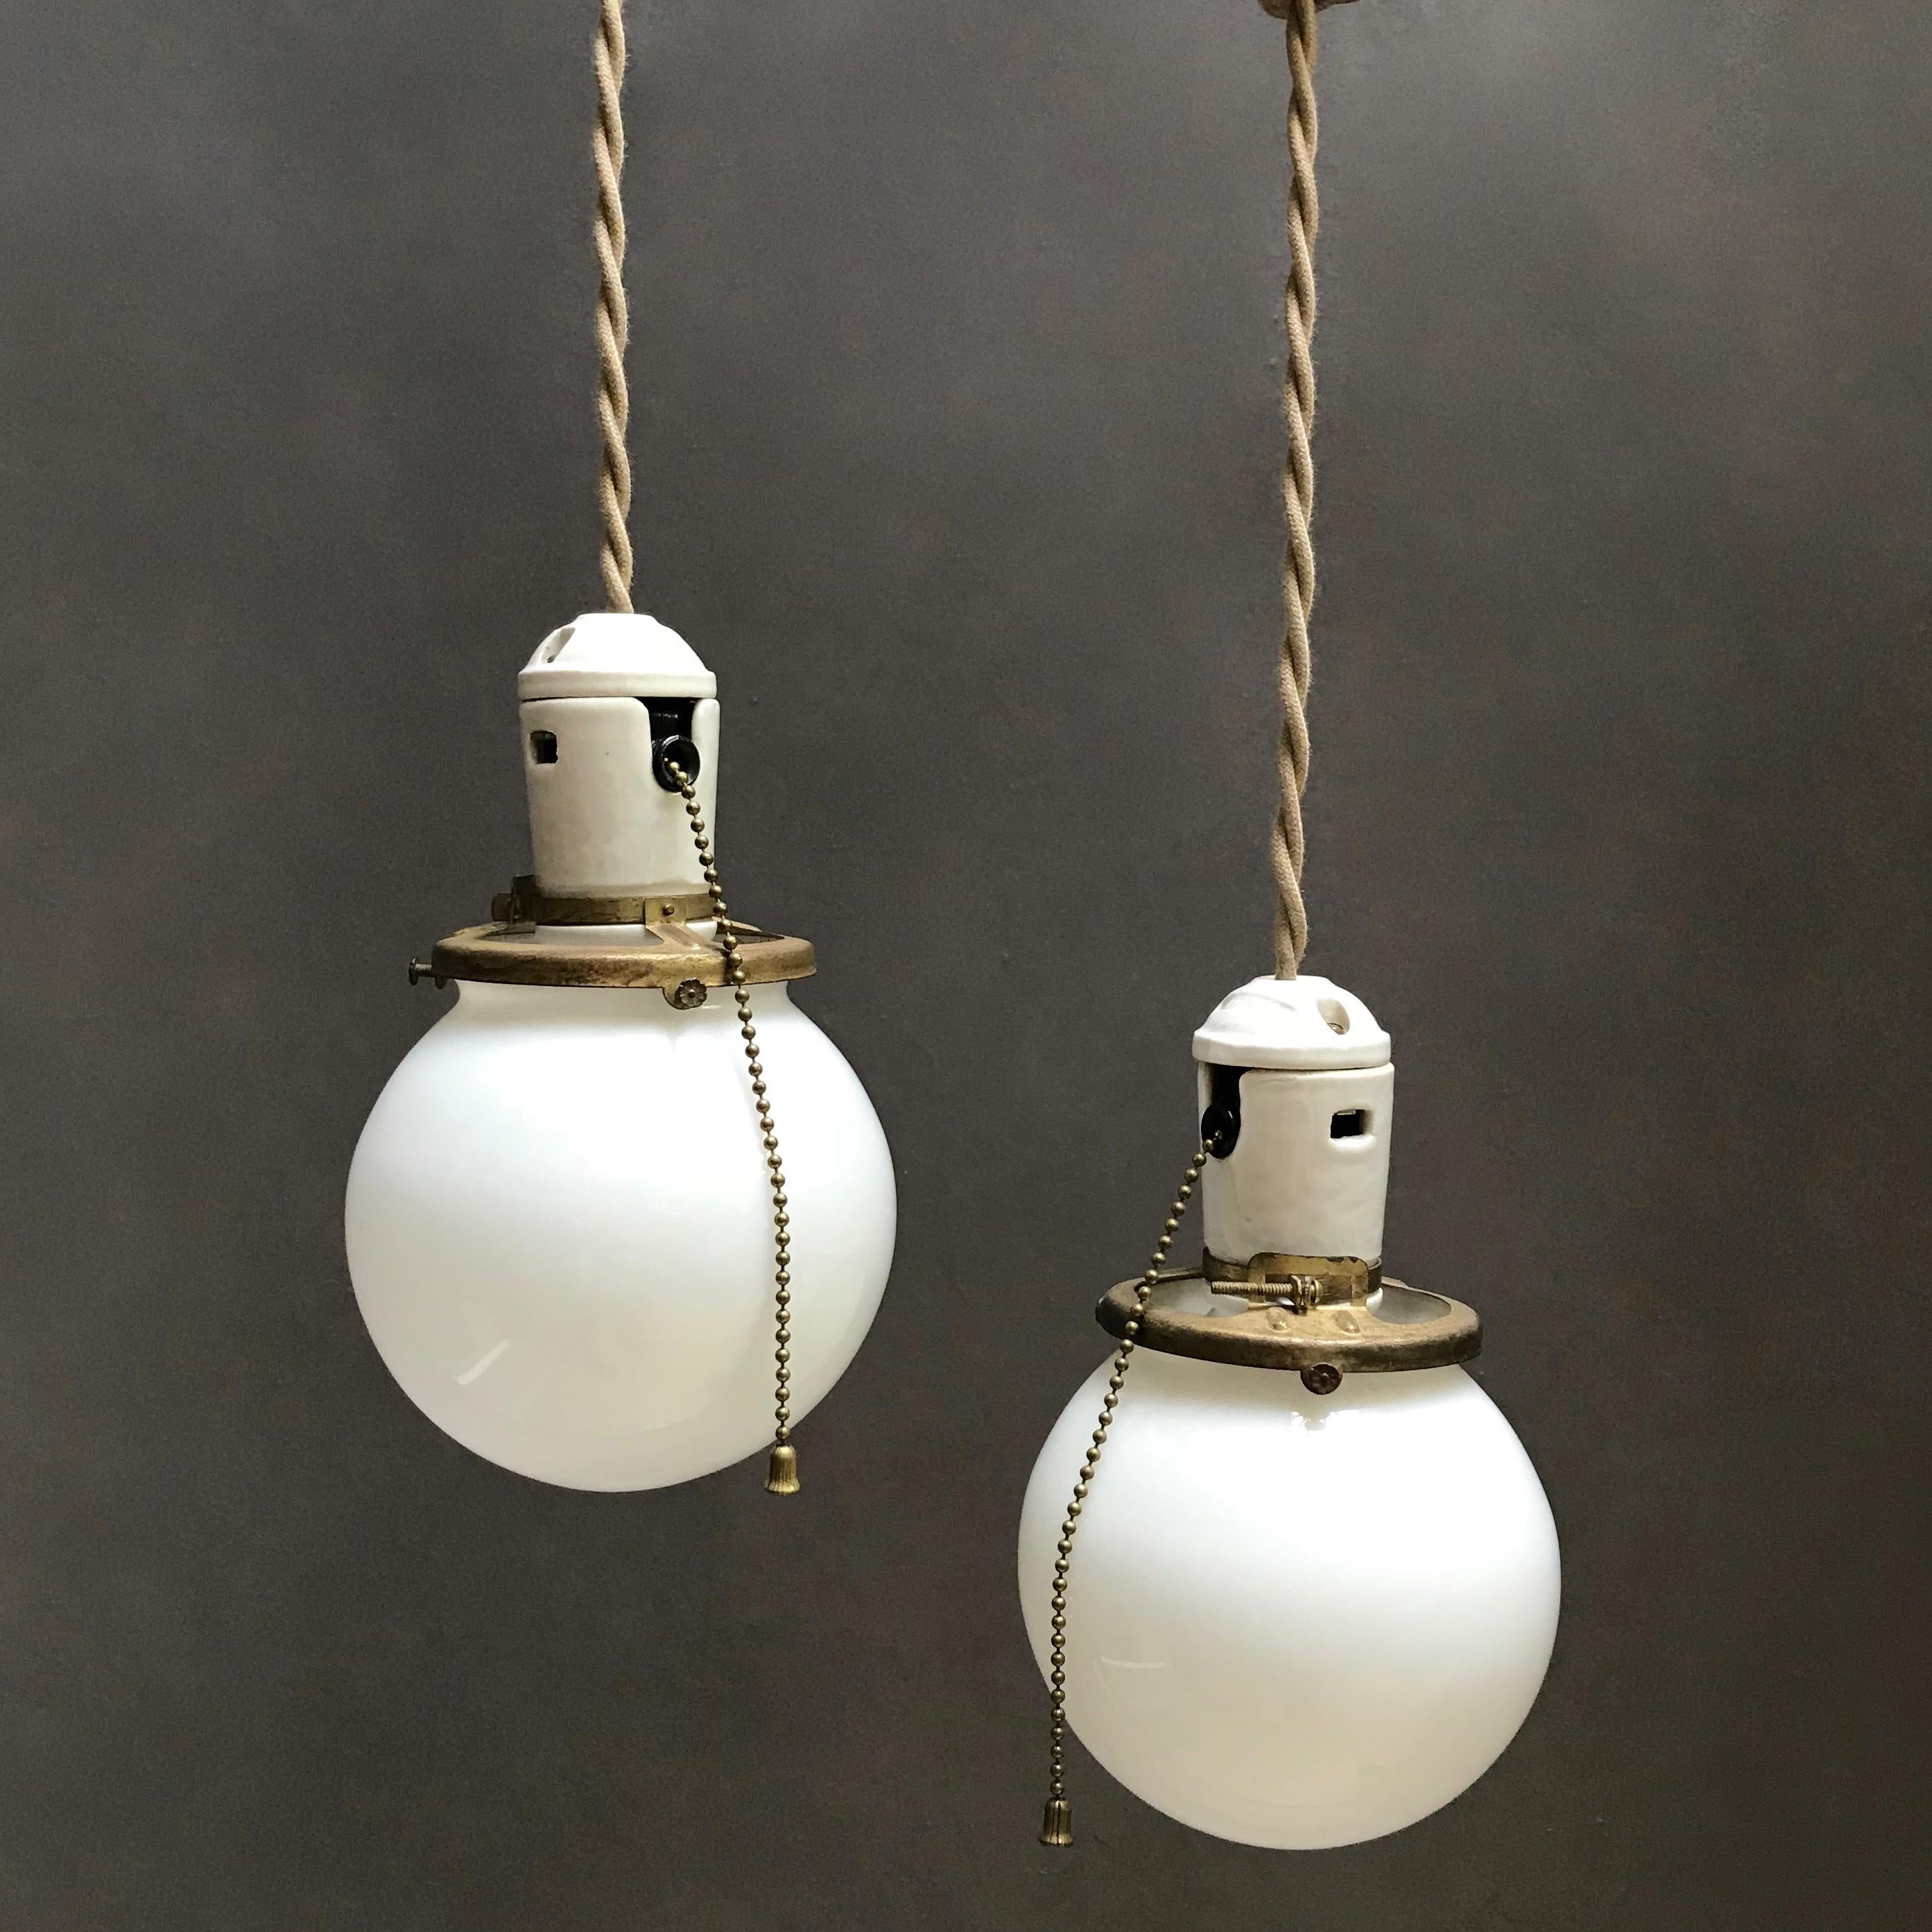 Pair of petite, Industrial, pendant lights feature milk glass globes with porcelain and brass, pull chain fitters are newly wired with beige, braided cloth cord to hang 45 inches. The lamps can accept up to 100 watt bulbs each. Listed price is for